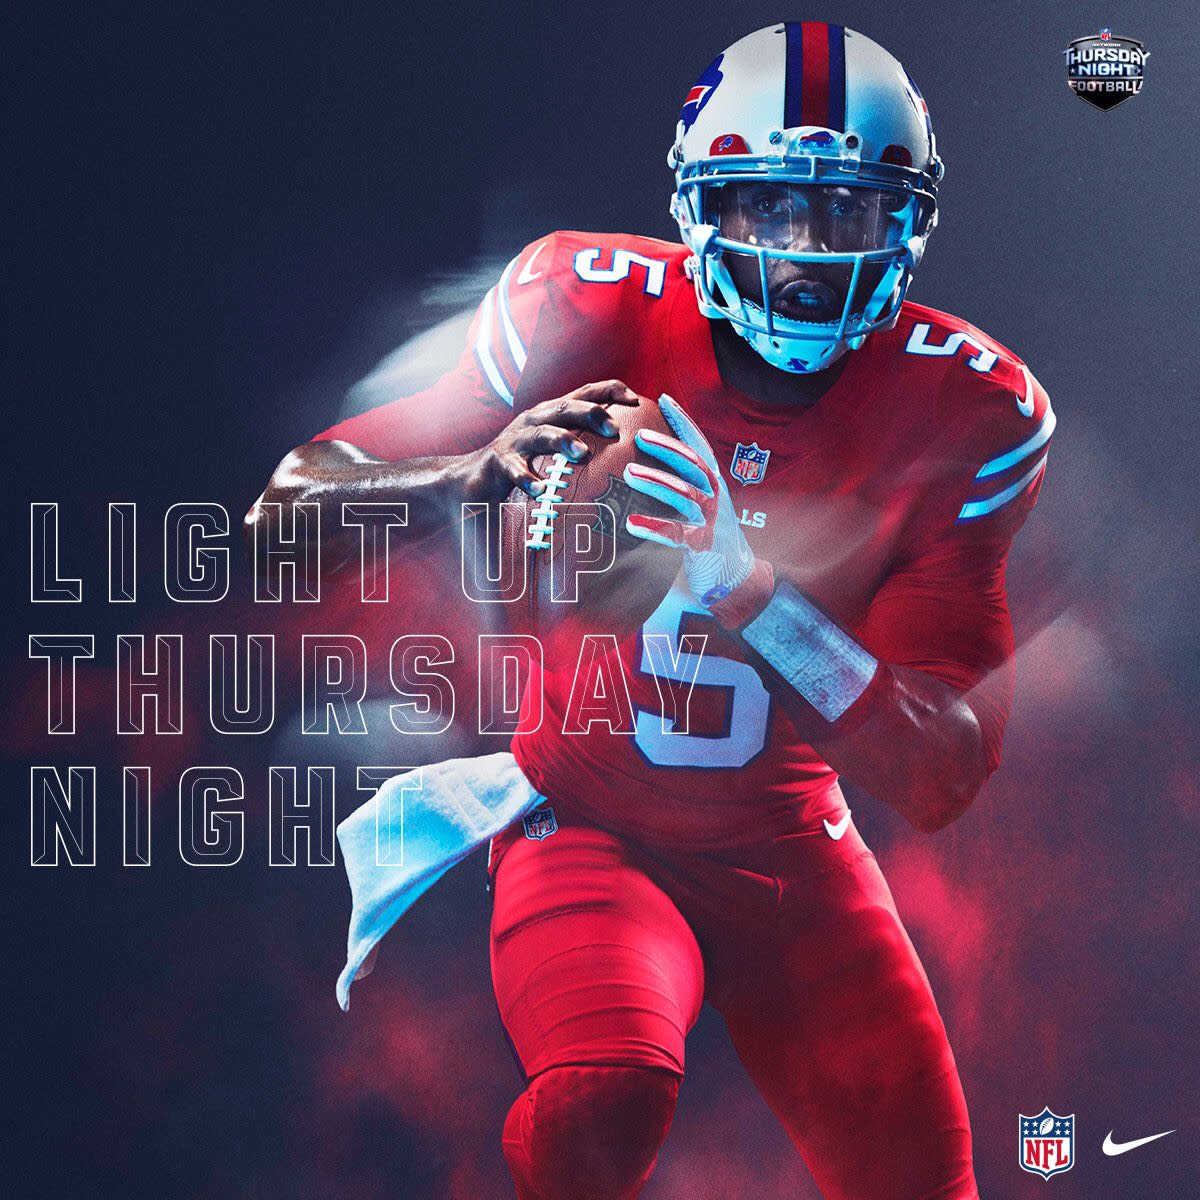 NFL color rush uniforms: Ranking best, worst jerseys - Sports Illustrated